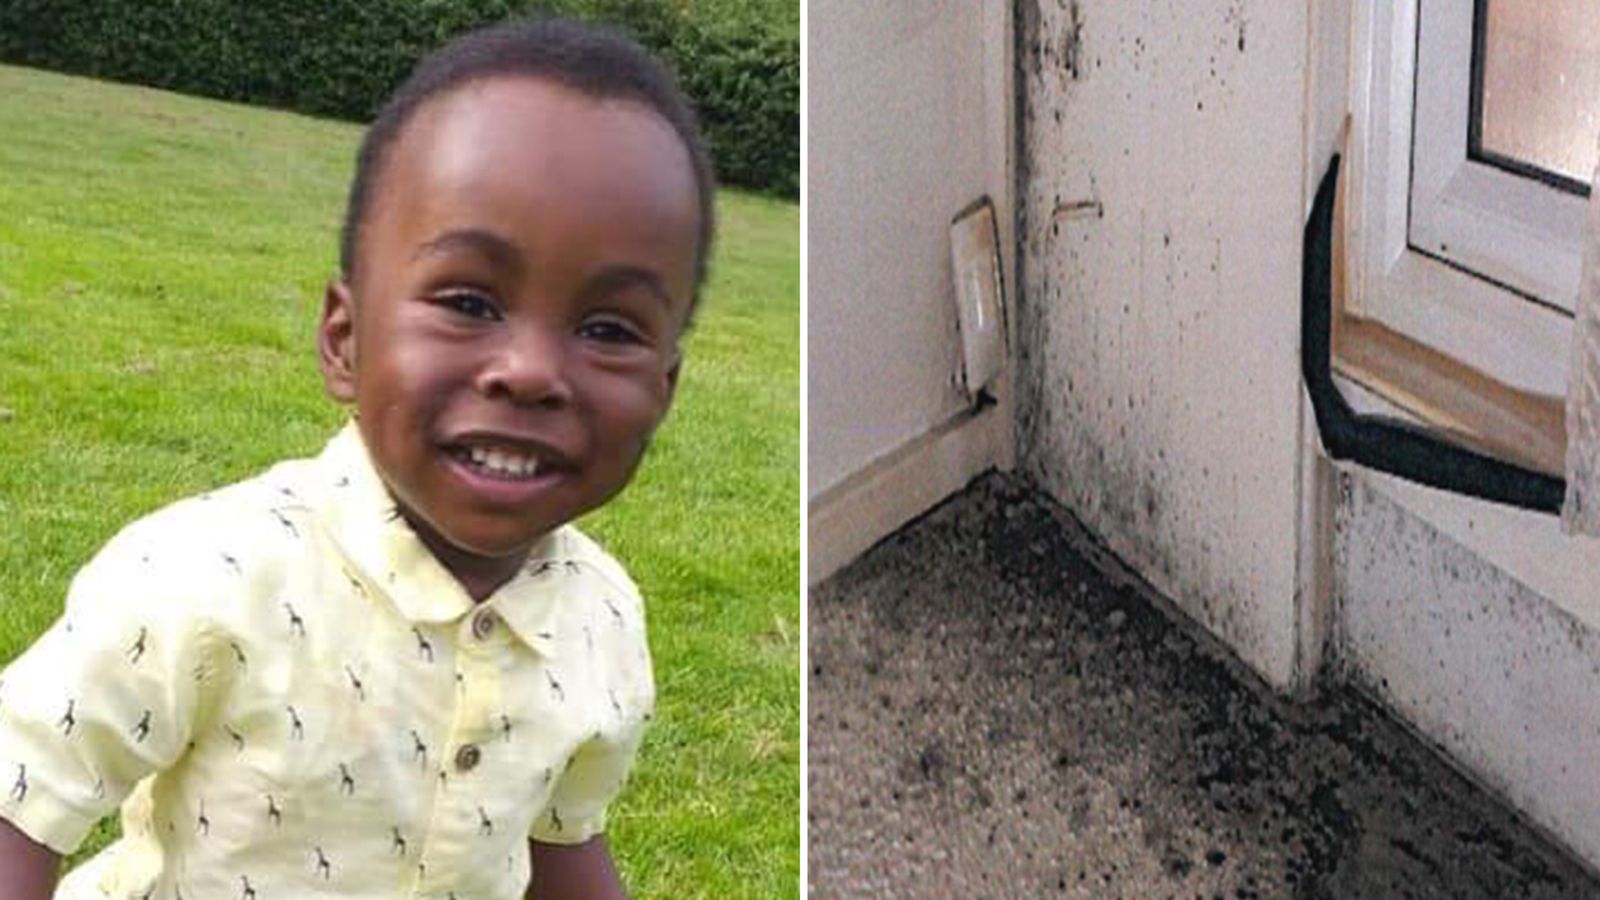 Family of Awaab Ishak killed by mould in Rochdale flat say racism played part in his death